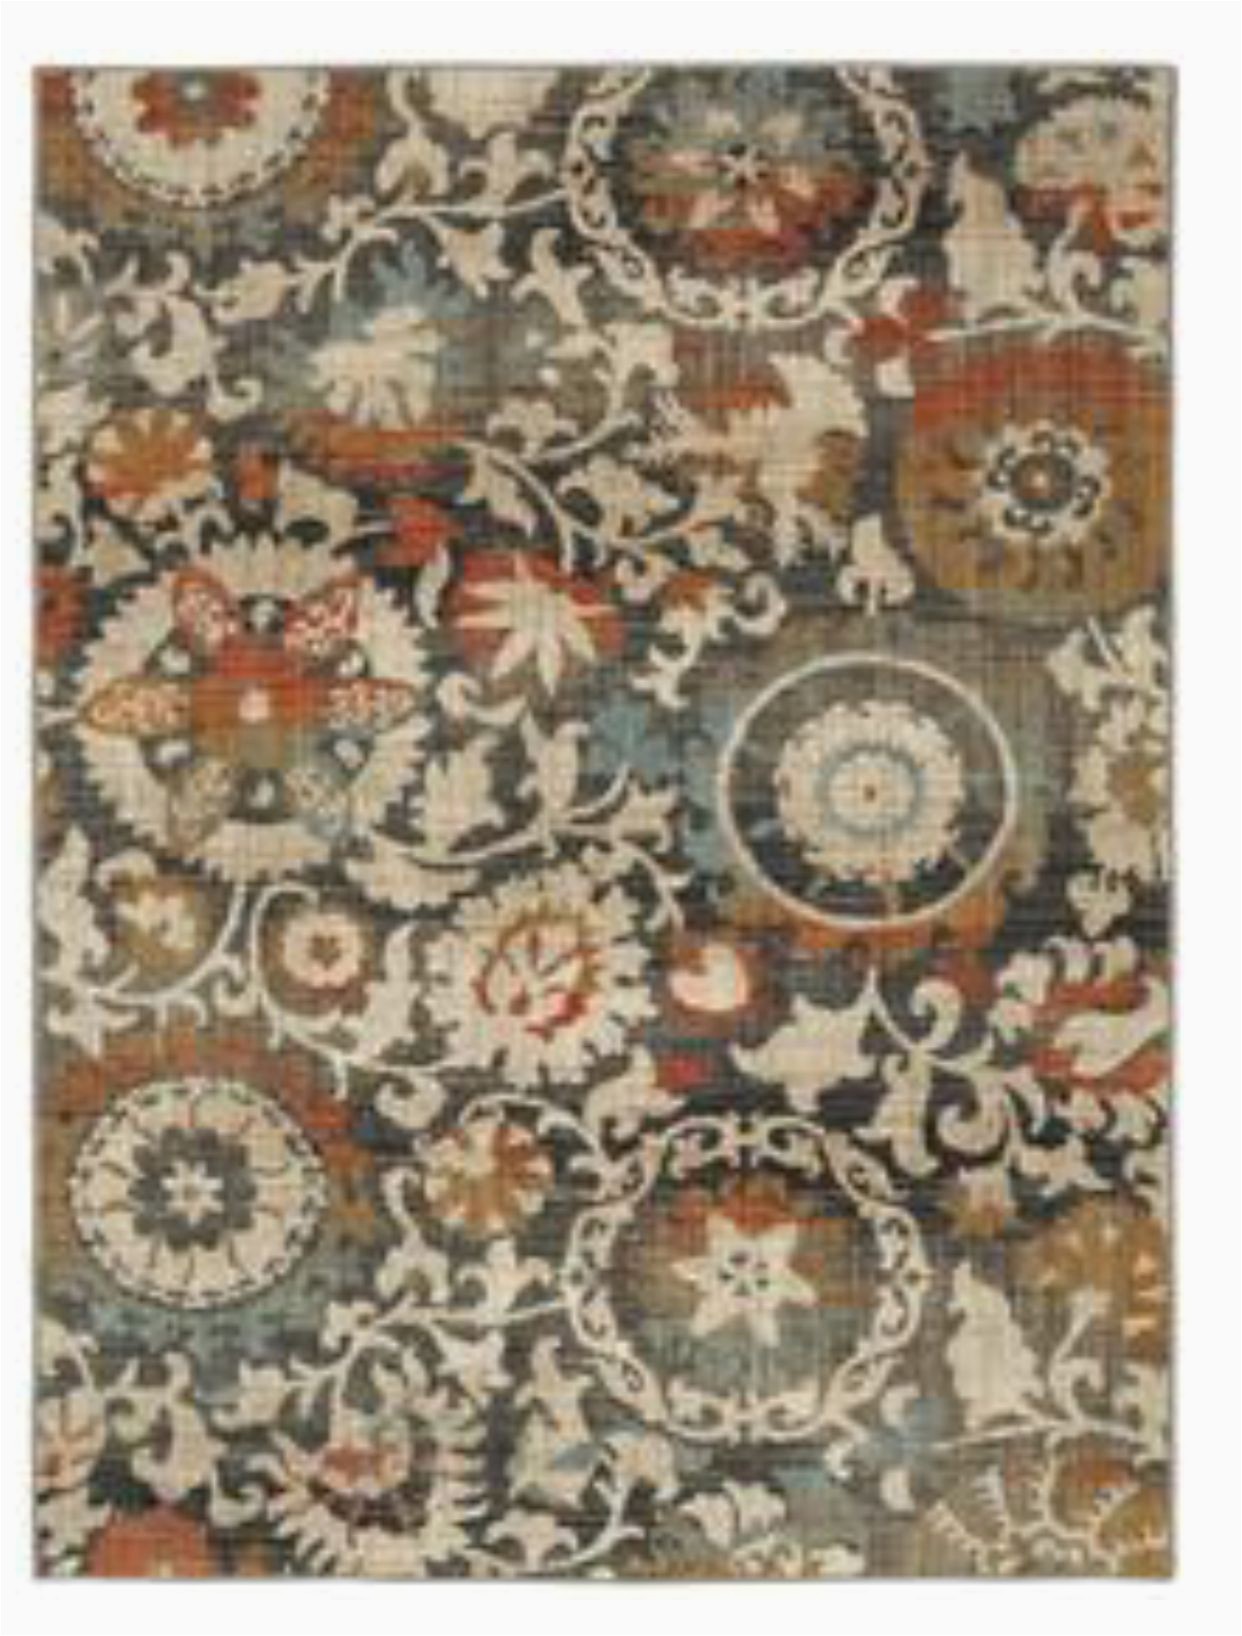 Lowes Indoor Outdoor area Rugs Allen Roth Adderly Rug From Lowe S